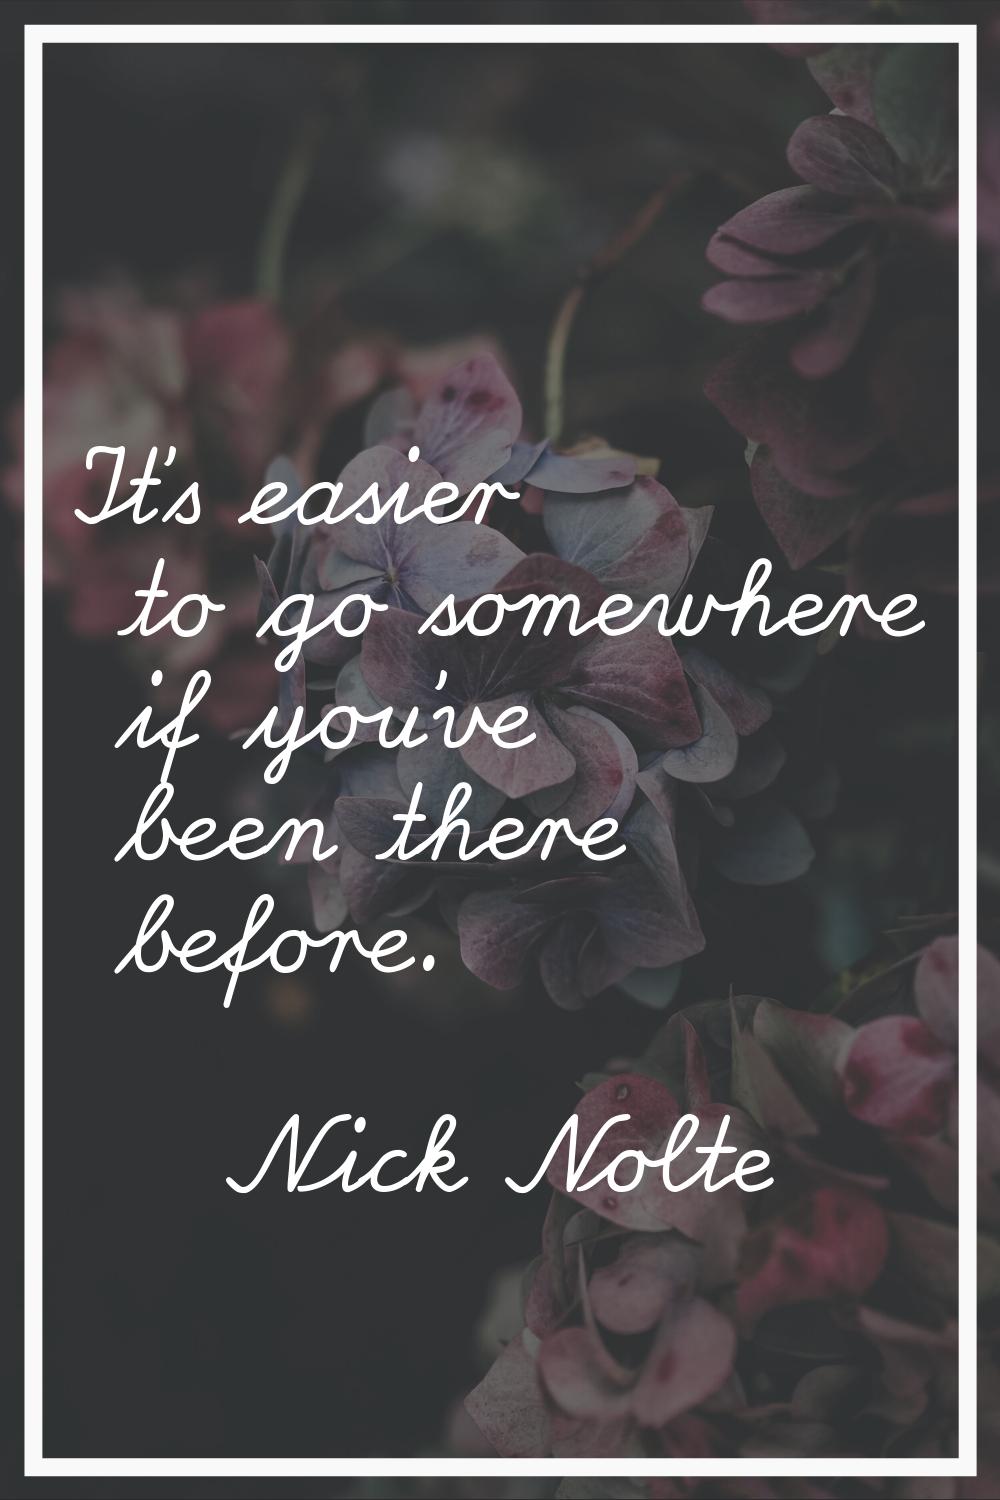 It's easier to go somewhere if you've been there before.